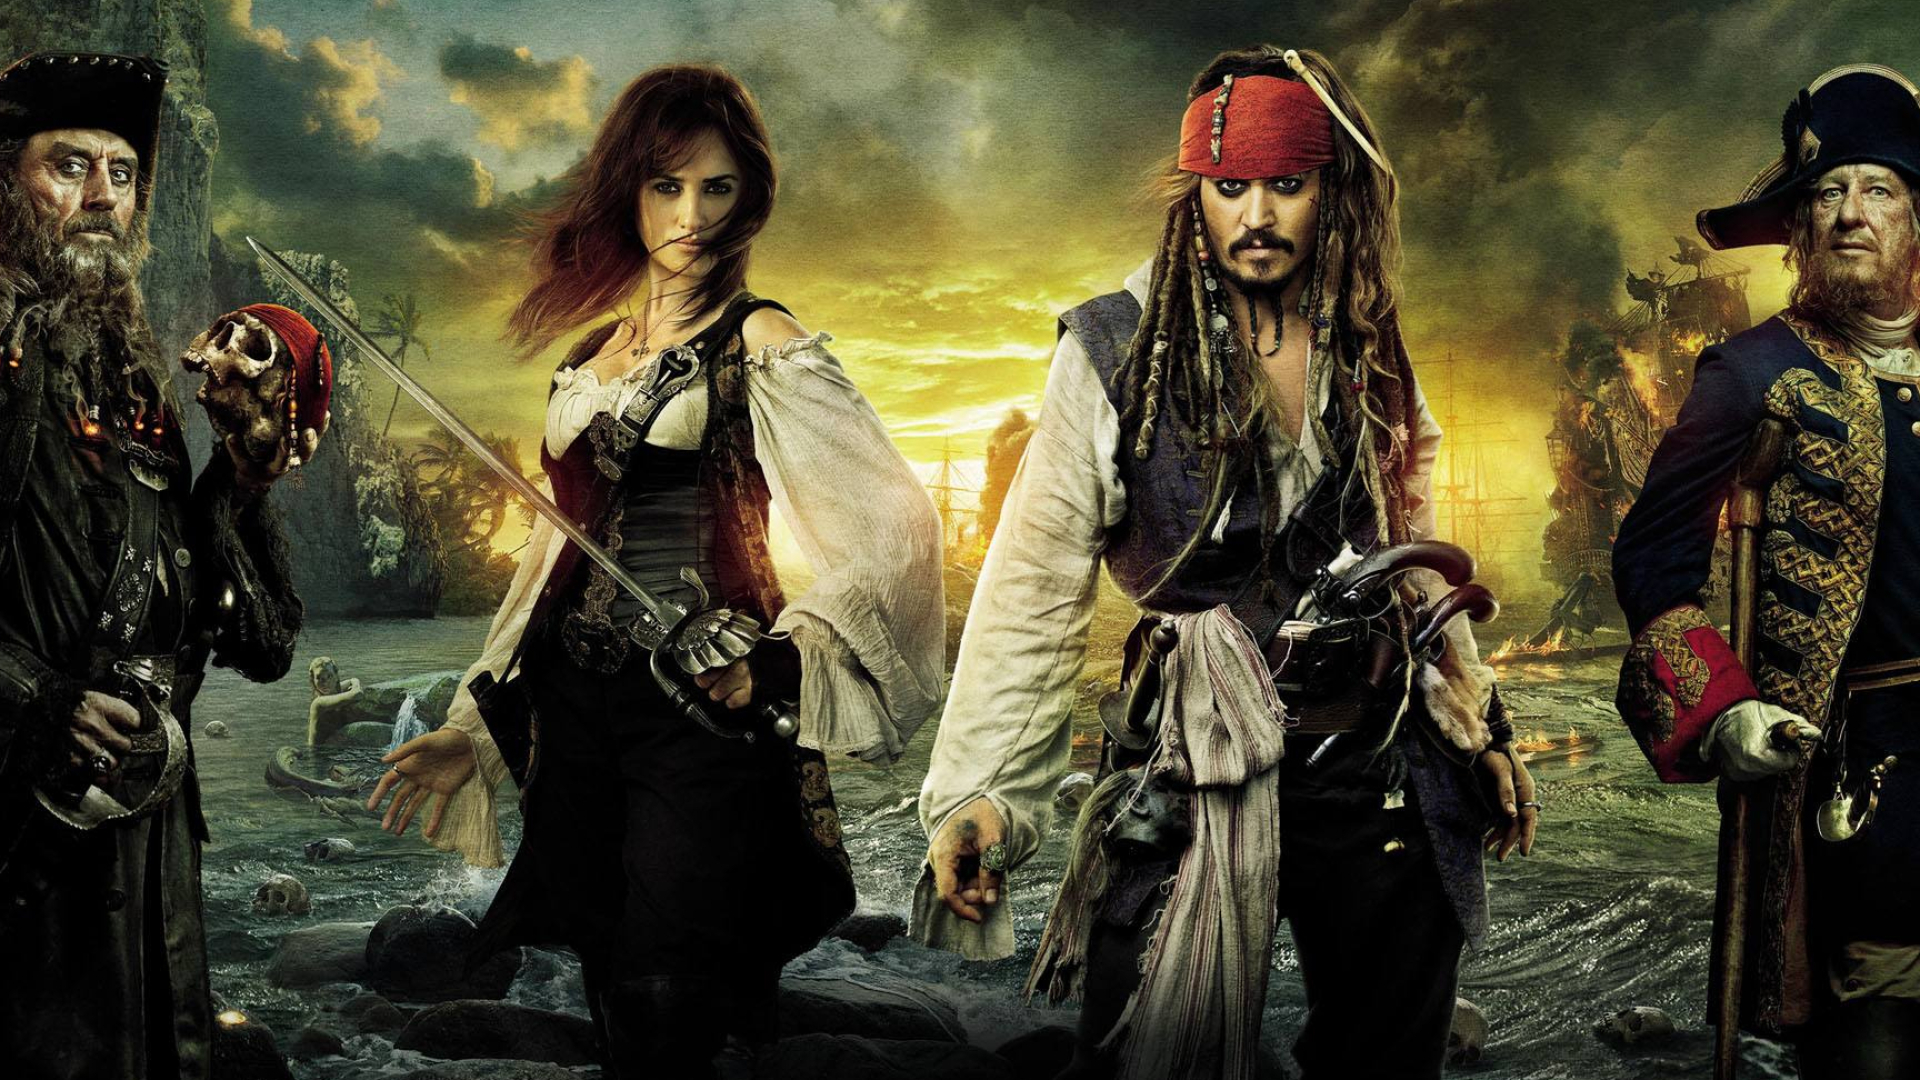 1920x1080 Pirates of the Caribbean On Stranger Tides (2011) Movie HD Wallpapers